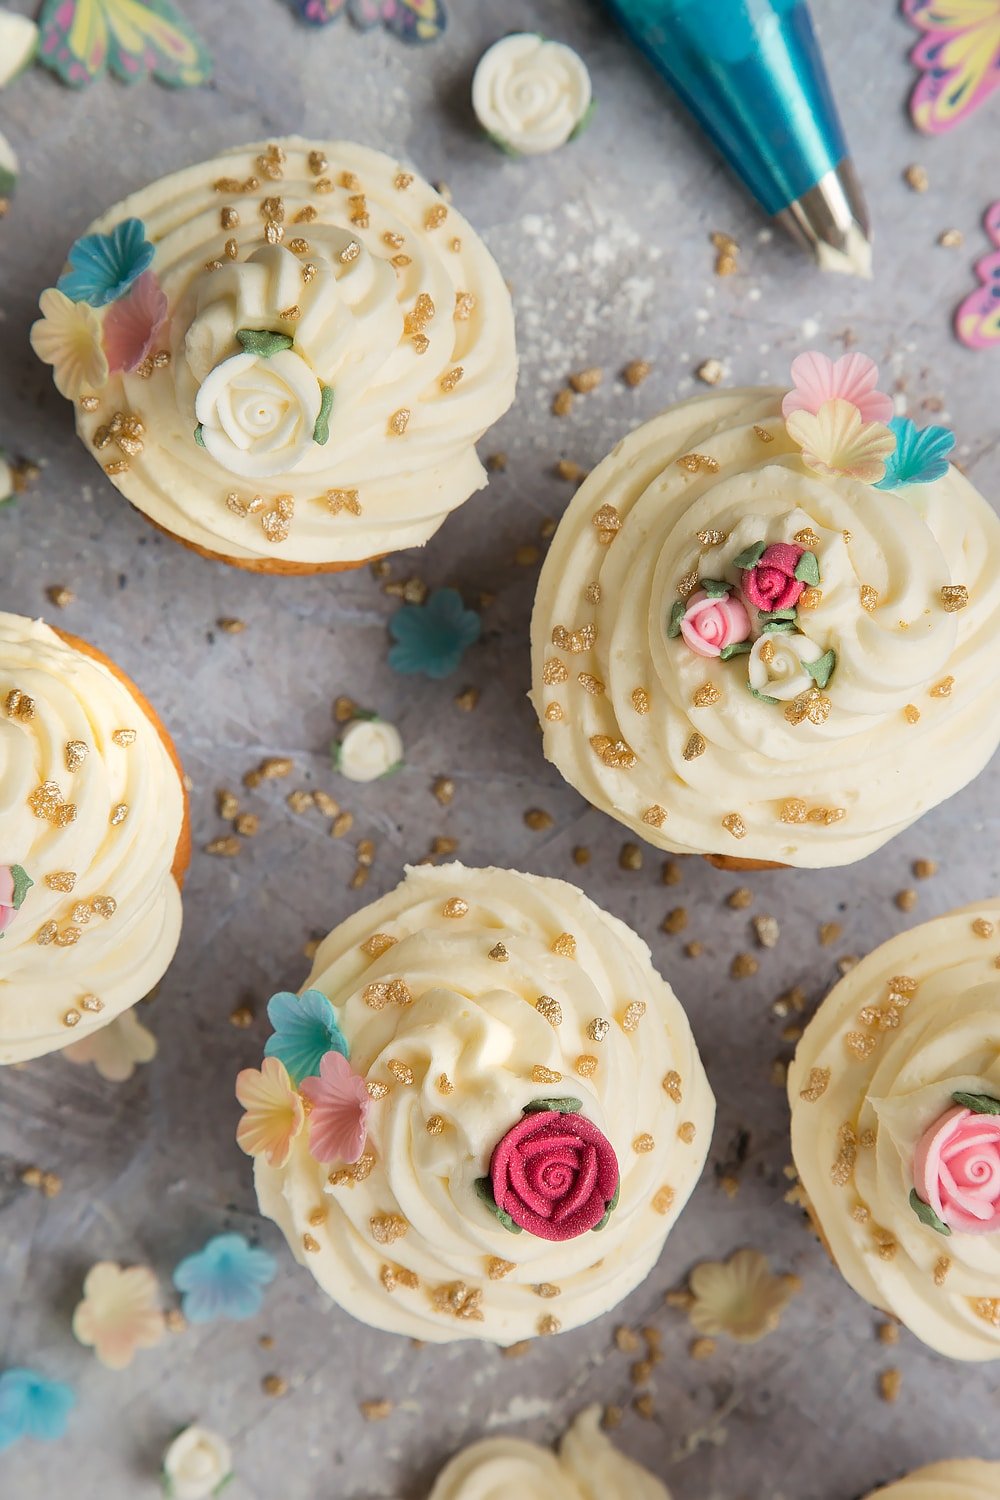 Top the lemon cupcakes with your choice of decorations - shown here are sugar roses, flowers and gold decorations